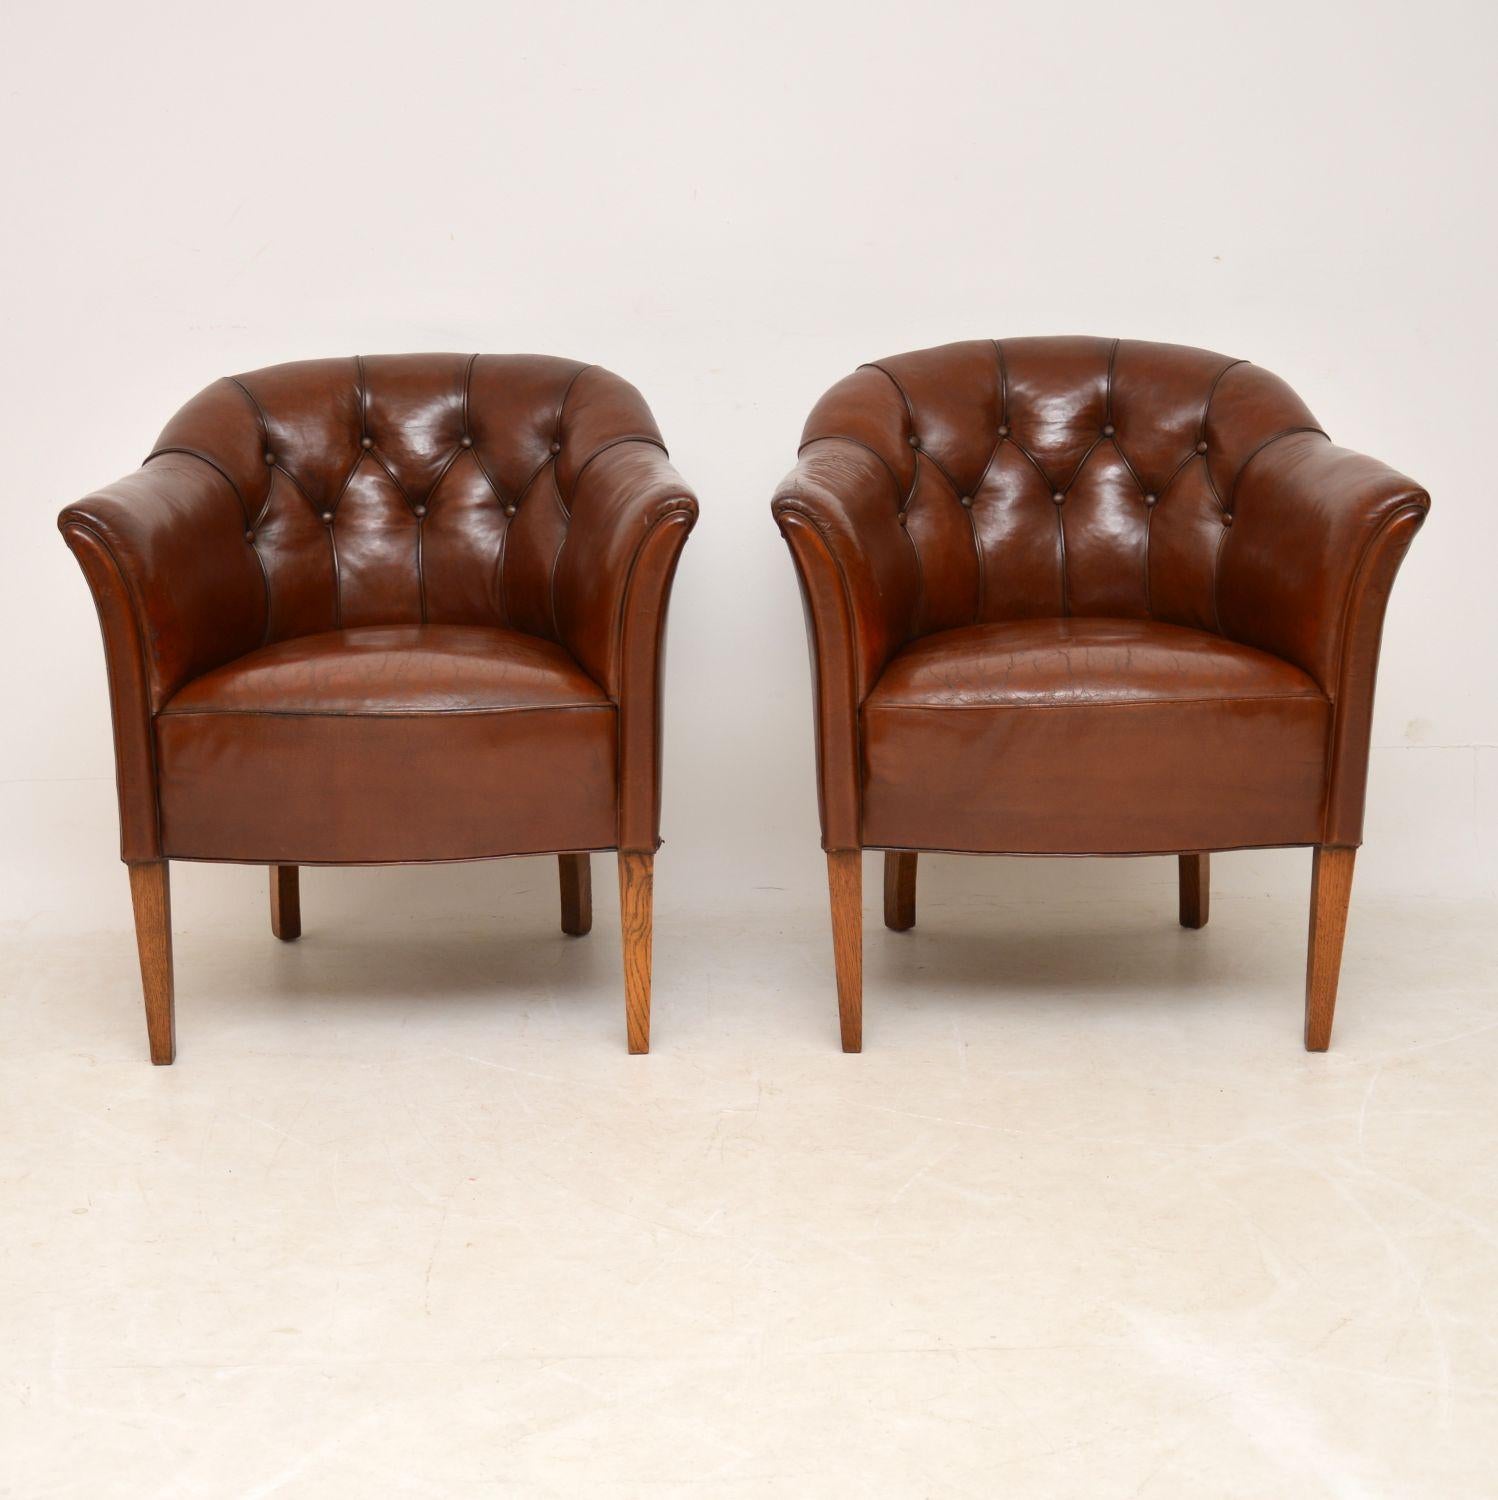 Fabulous pair of original antique Swedish leather armchairs with deep buttoned backs and in excellent condition, dating to circa 1910 period. They have fully sprung seats and curved backs, so are very comfortable. These chairs have just come over